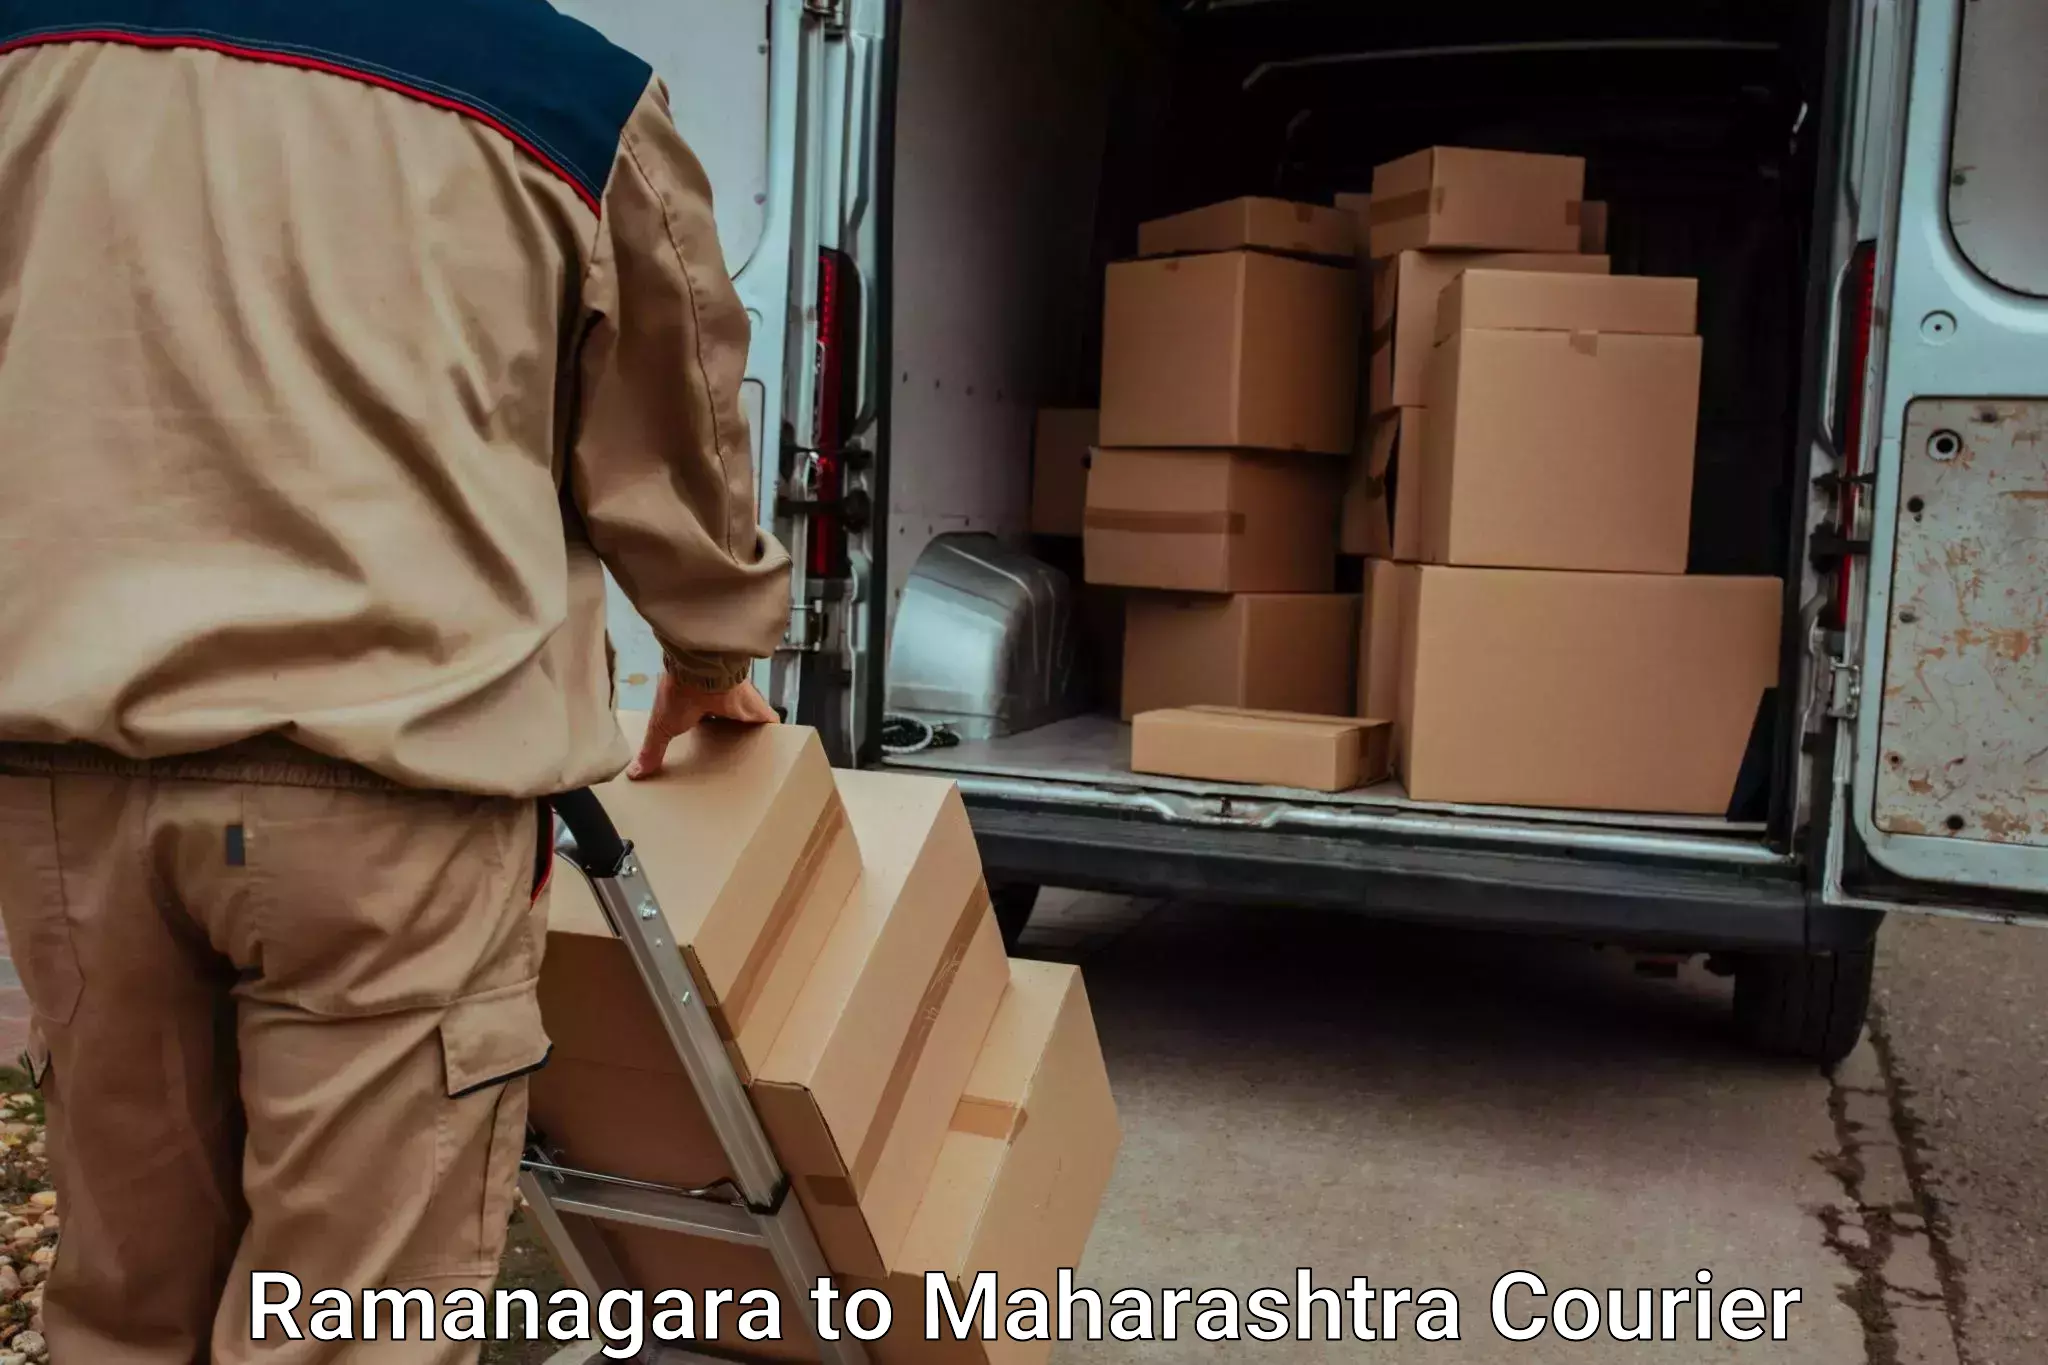 Personal effects shipping Ramanagara to SVKMs Narsee Monjee Institute of Management Studies Mumbai